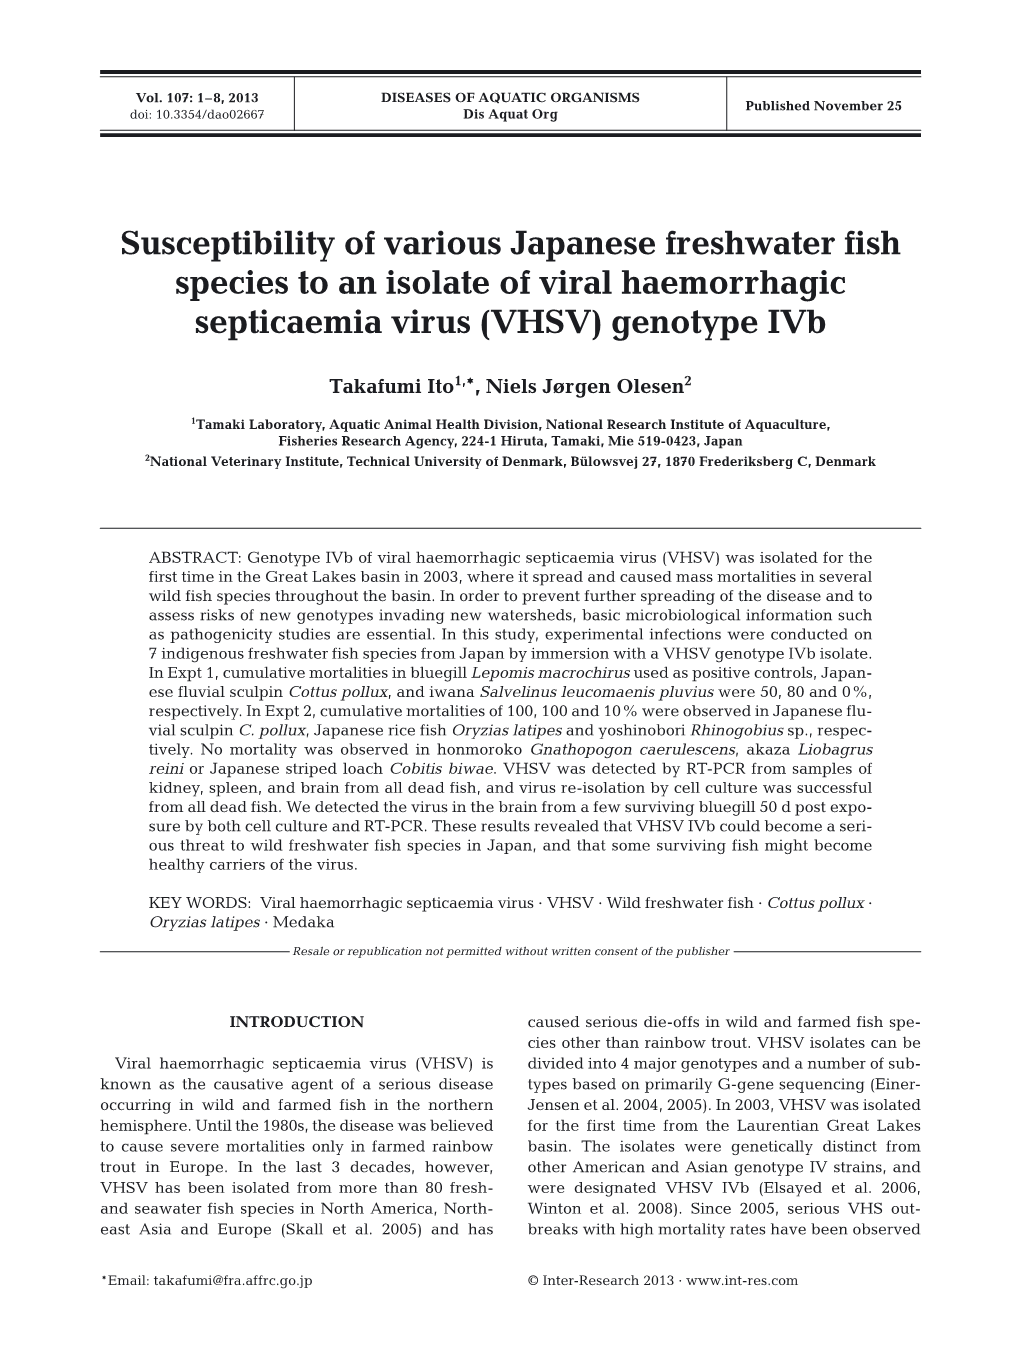 Susceptibility of Various Japanese Freshwater Fish Species to an Isolate of Viral Haemorrhagic Septicaemia Virus (VHSV) Genotype Ivb